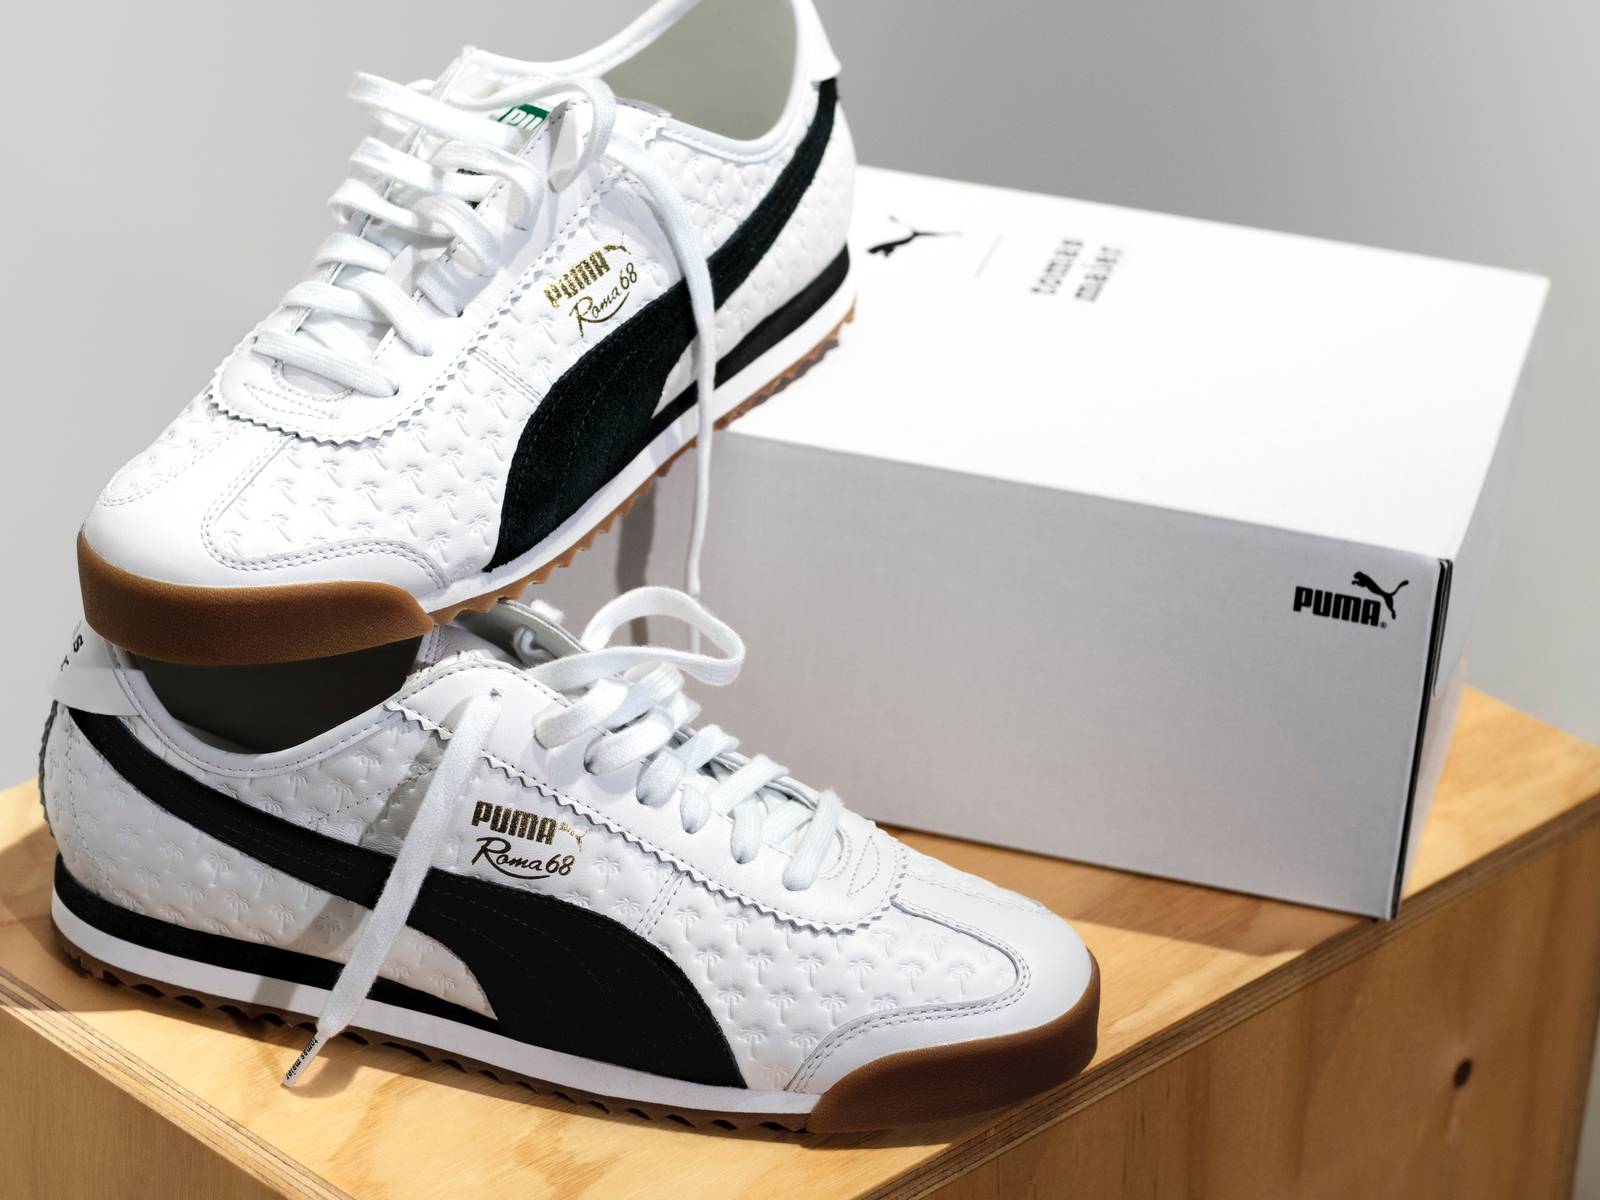 Kering continues to wind down Puma stake